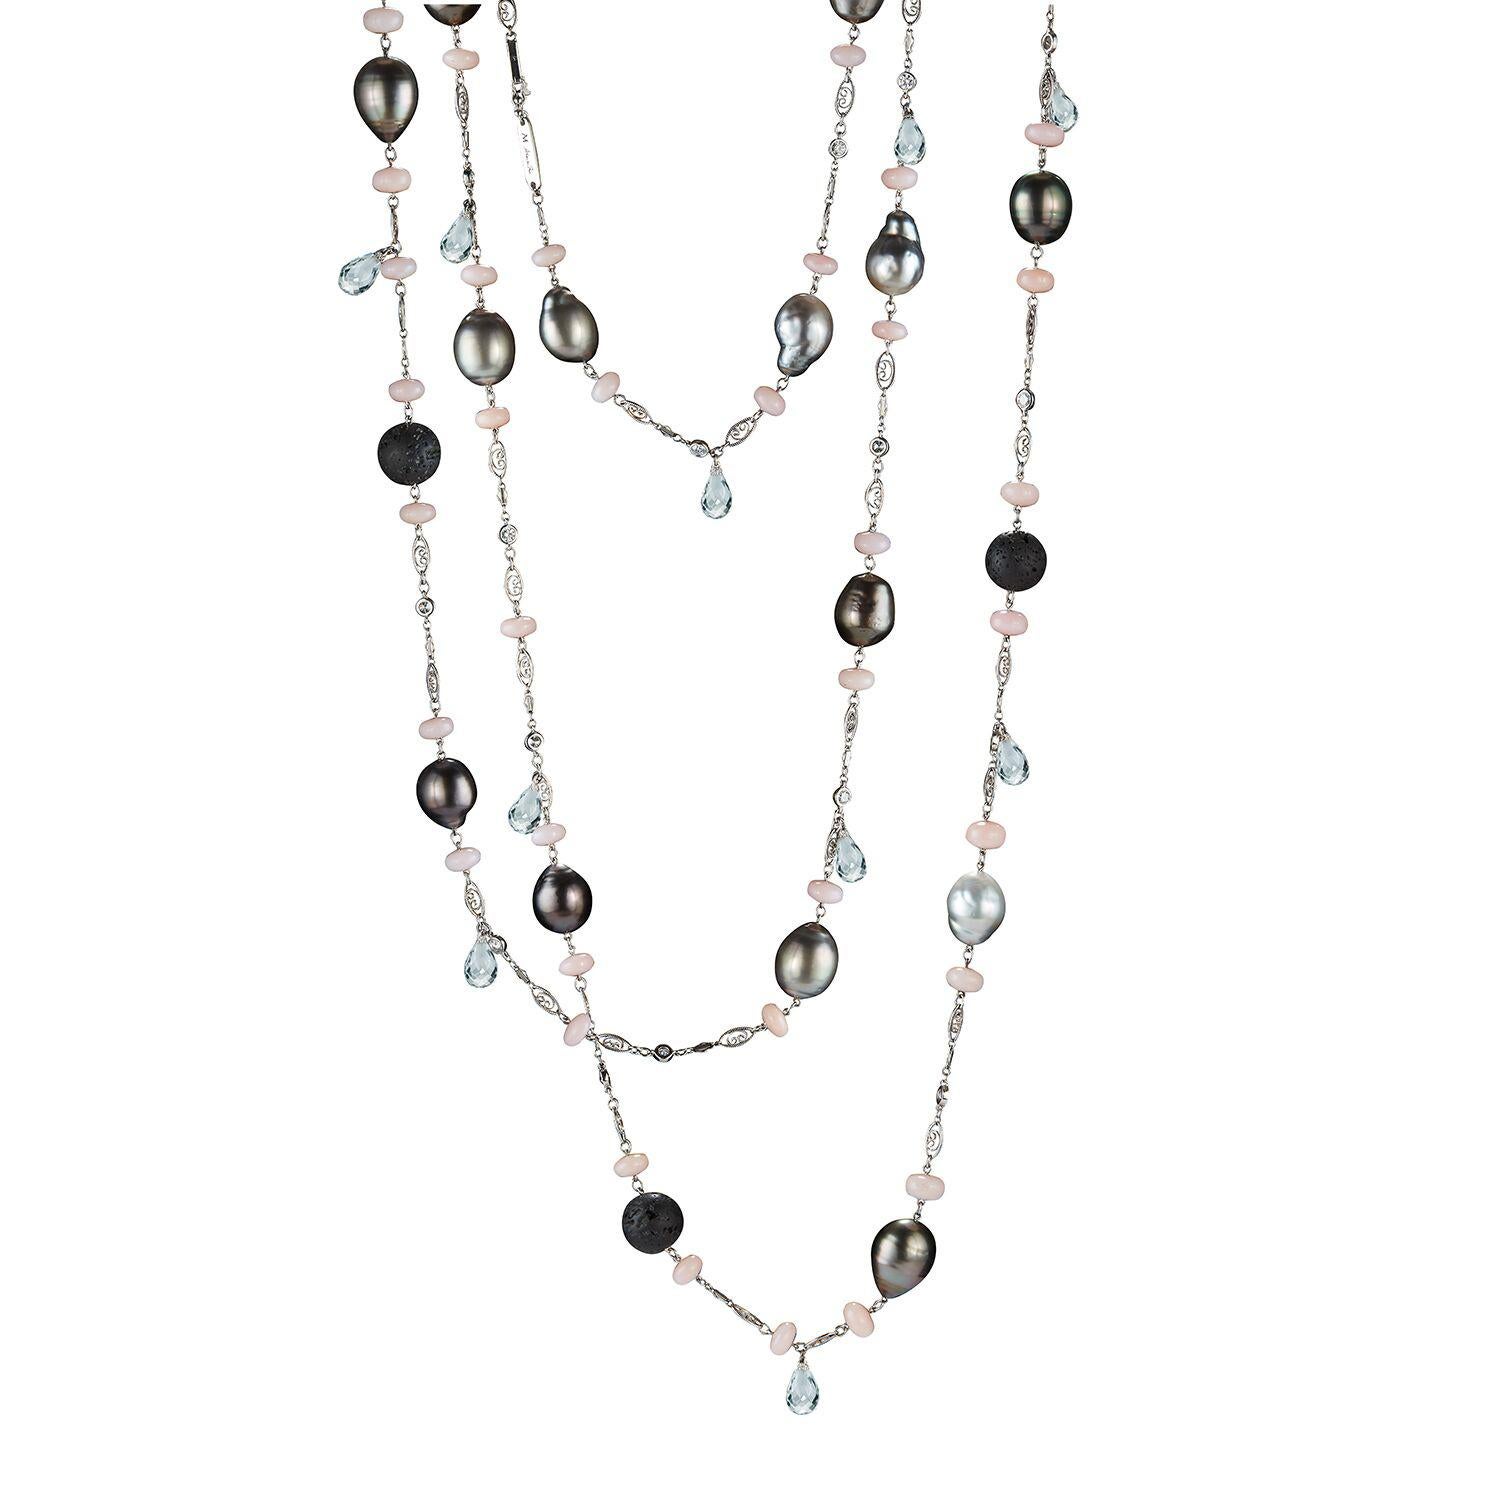 Alexandra Mor Pink Opal, Lava Beads and Pearl Sautoir Necklace For Sale